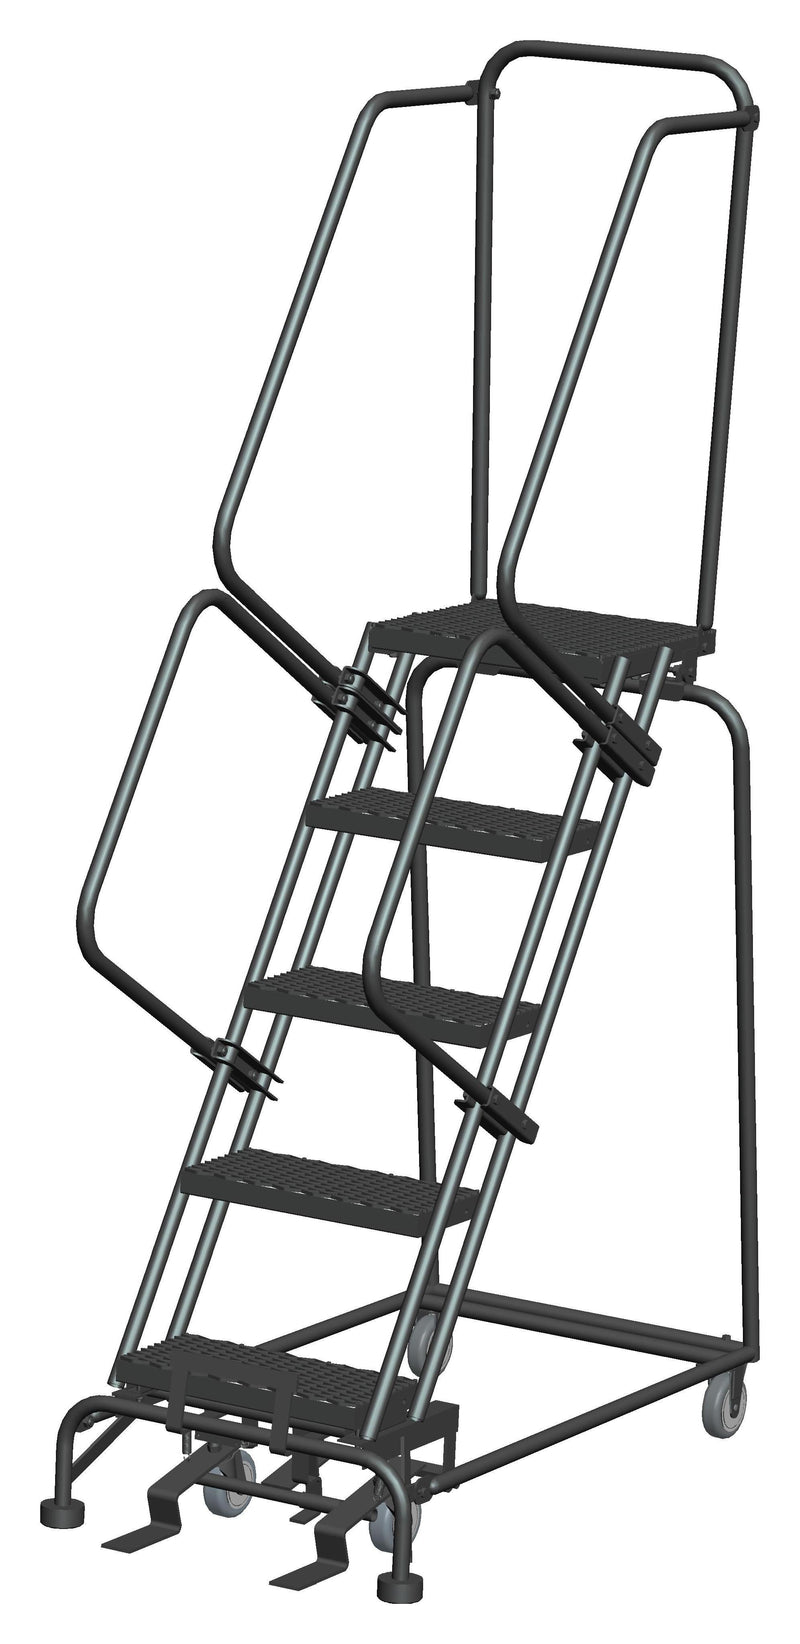 Rolling Ladder - M-2000 Series - 5 Step, Handrails - Ballymore